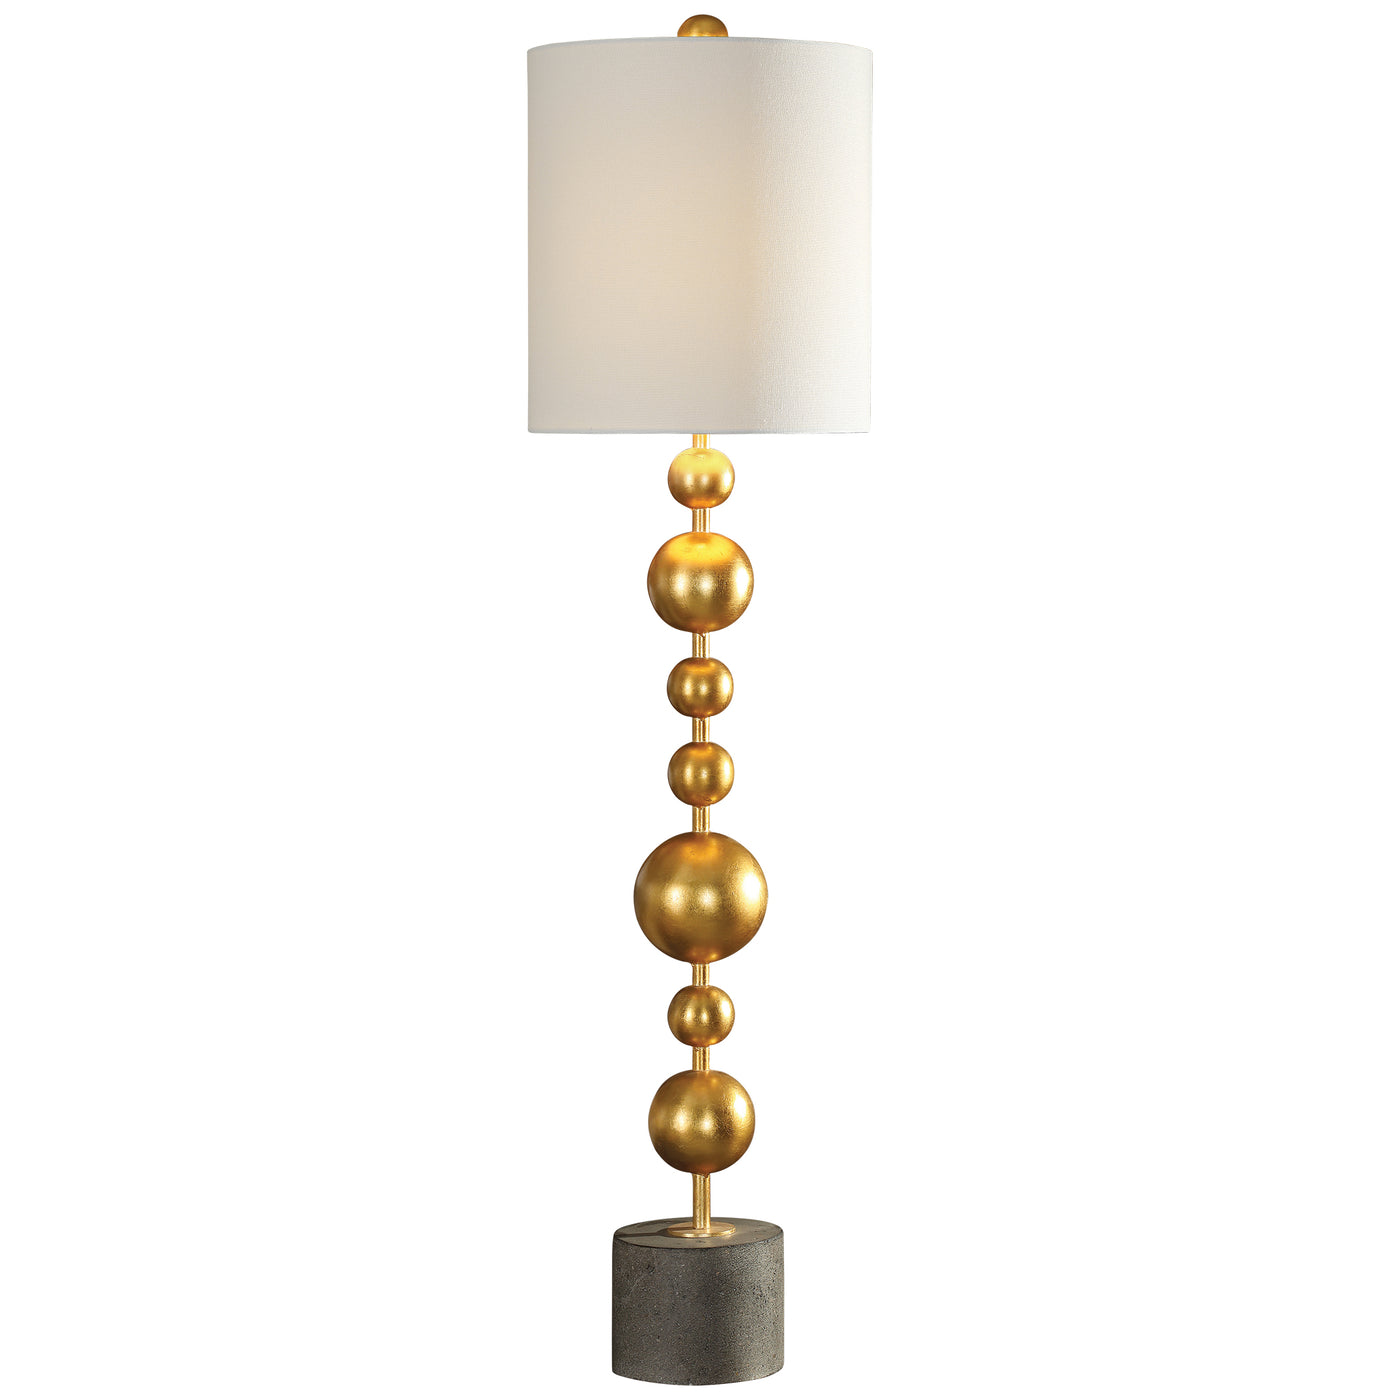 This Contemporary Design Features Stacked, Spun Metal Spheres, Finished In A Hand Applied Metallic Gold Leaf, Displayed On...